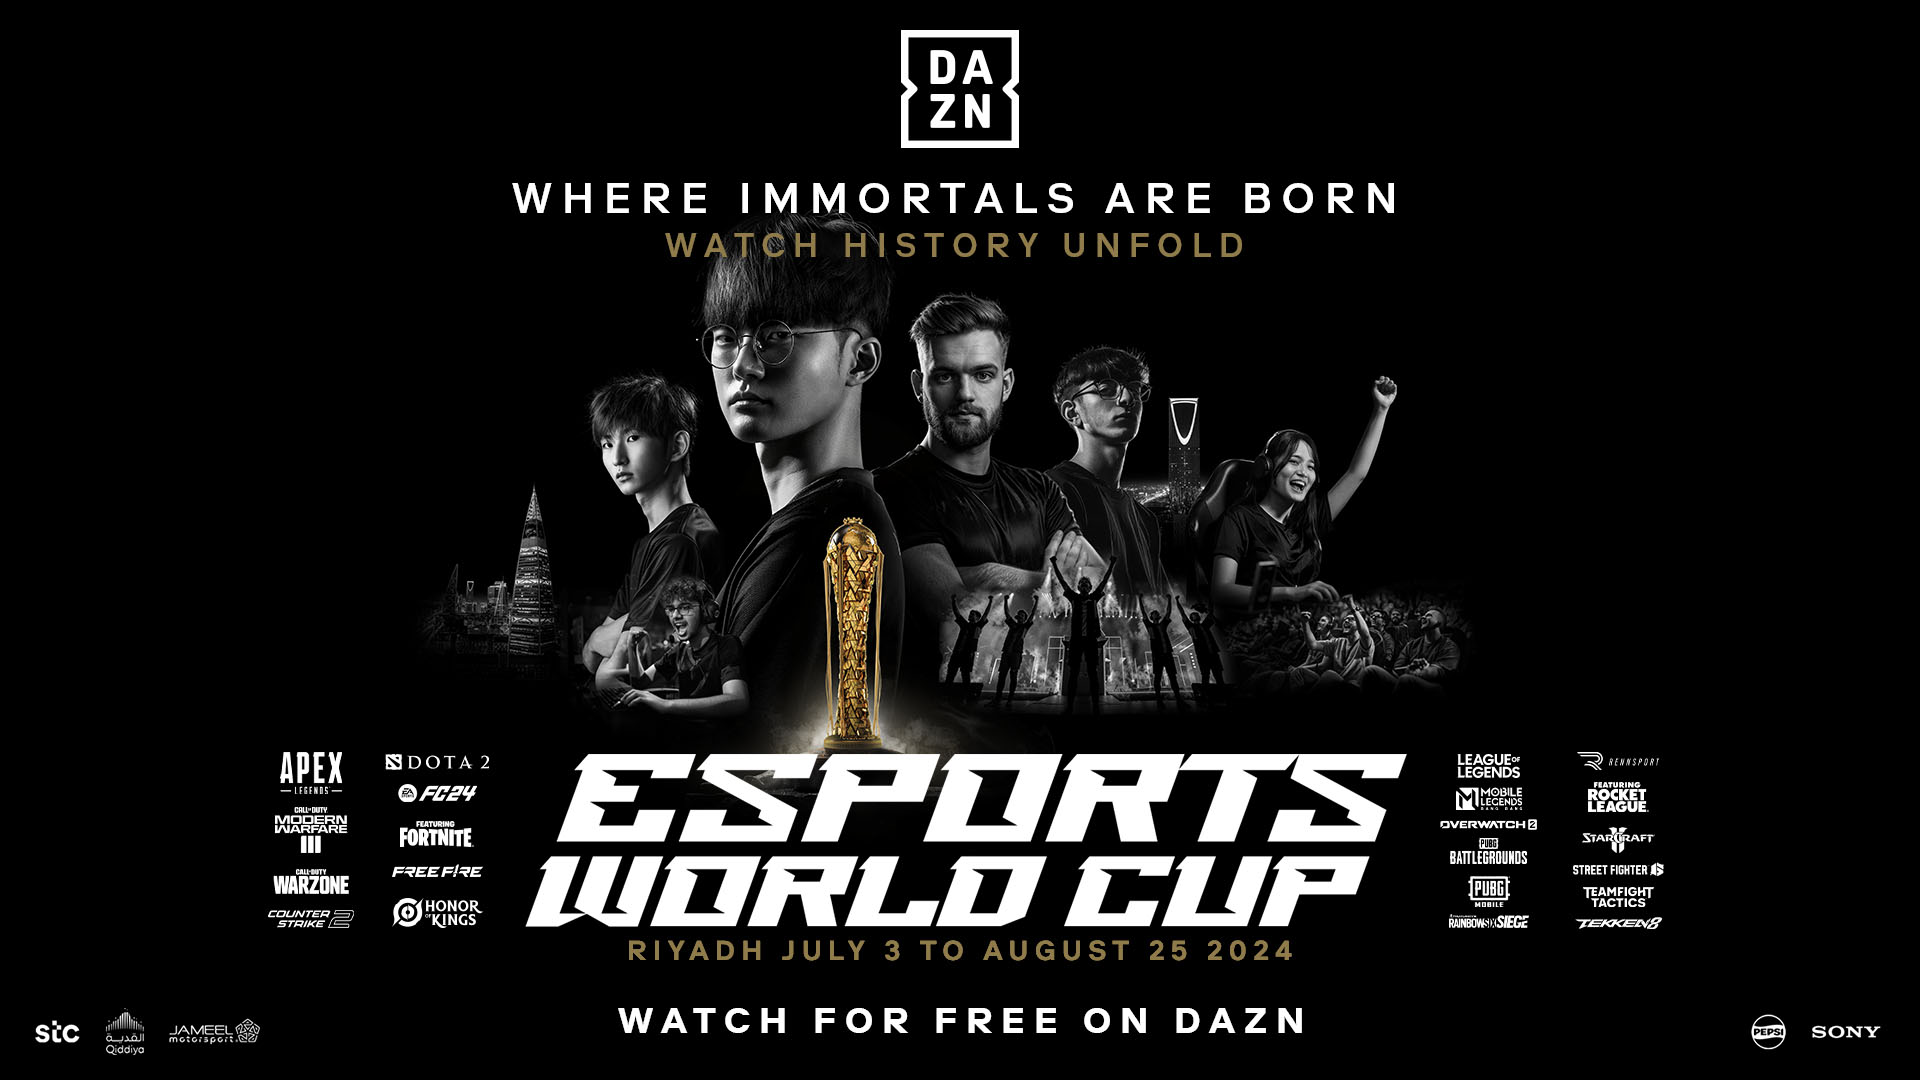 DAZN AND ESPORTS WORLD CUP FOUNDATION ENTER INTO GLOBAL PARTNERSHIP